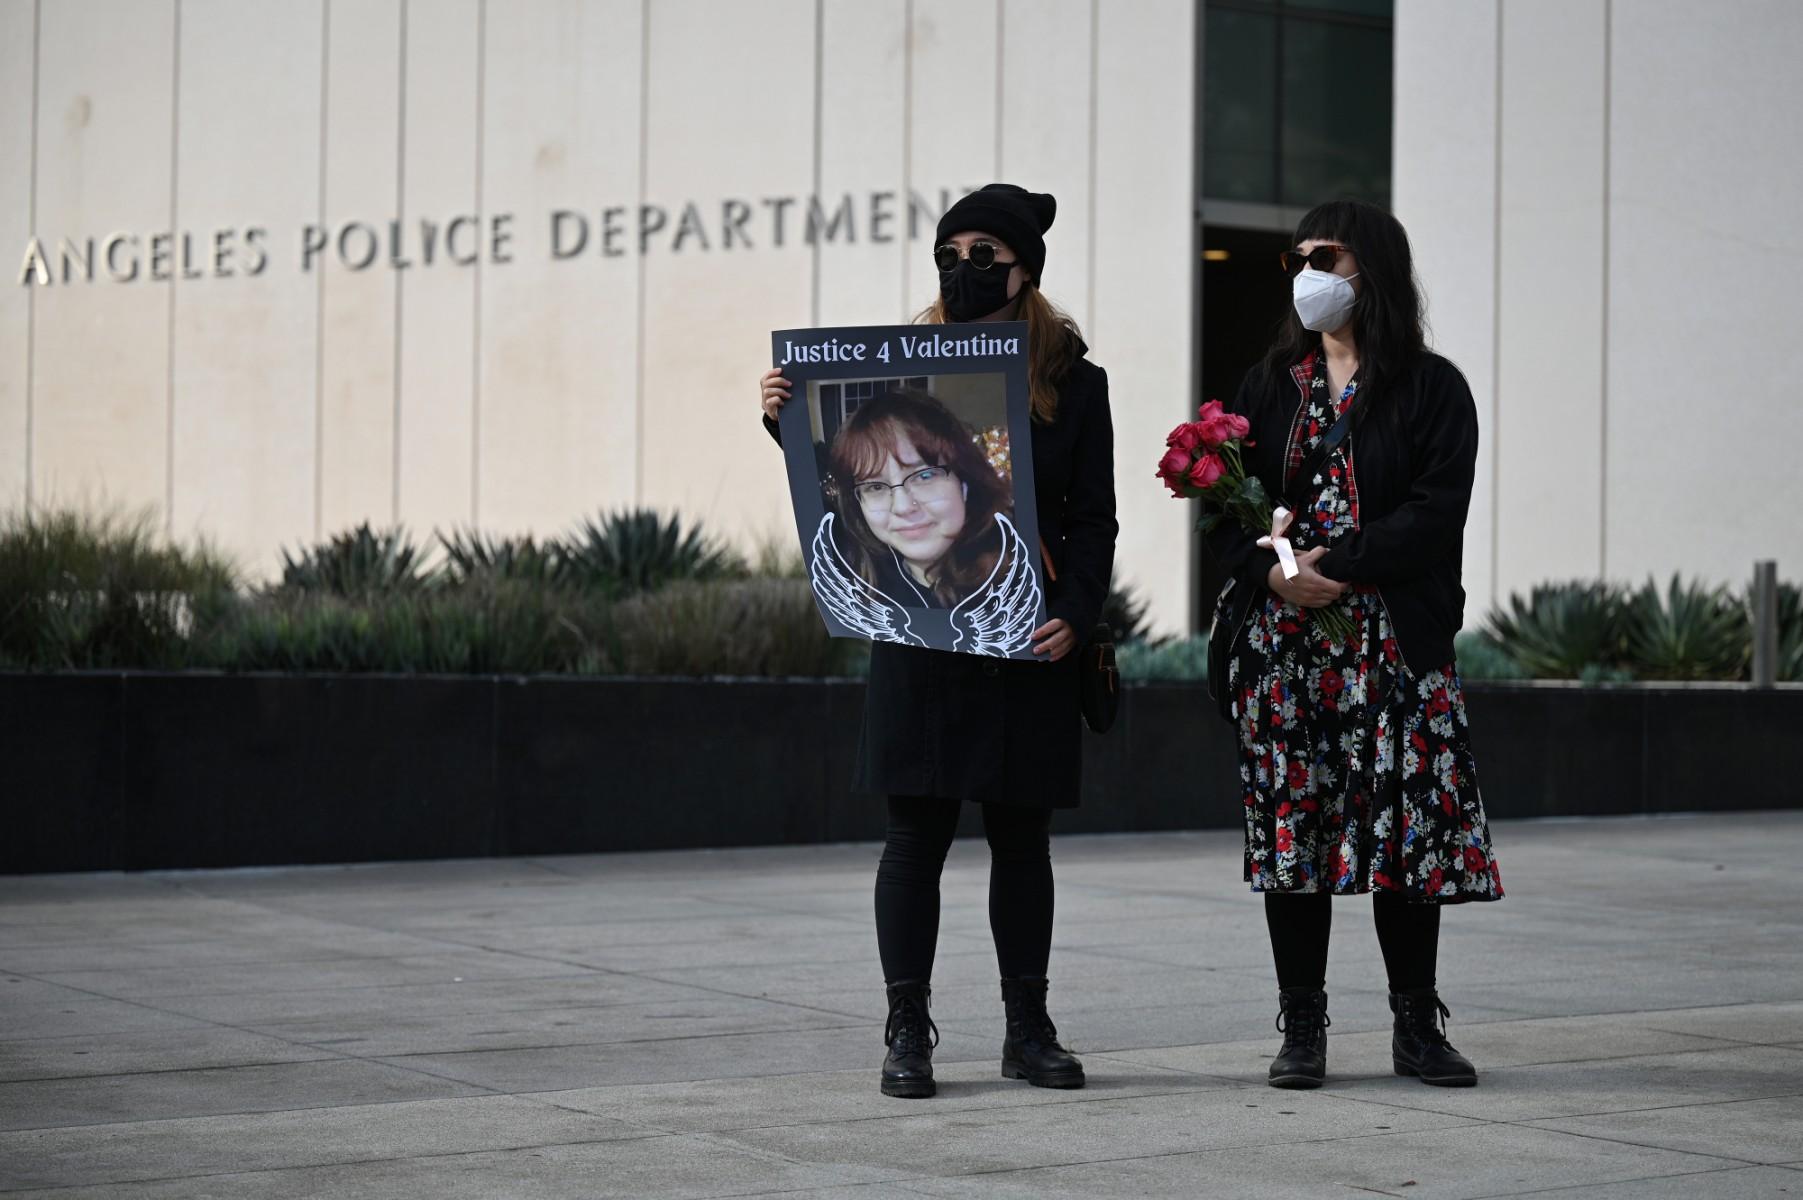 A protester holds a photo calling for justice for 14-year old Valentina Orellana-Peralta, who was killed by a stray police bullet last week while shopping at a clothing store, during a press conference outside Los Angeles Police Department headquarters in Los Angeles, California, Dec 28. Photo: AFP